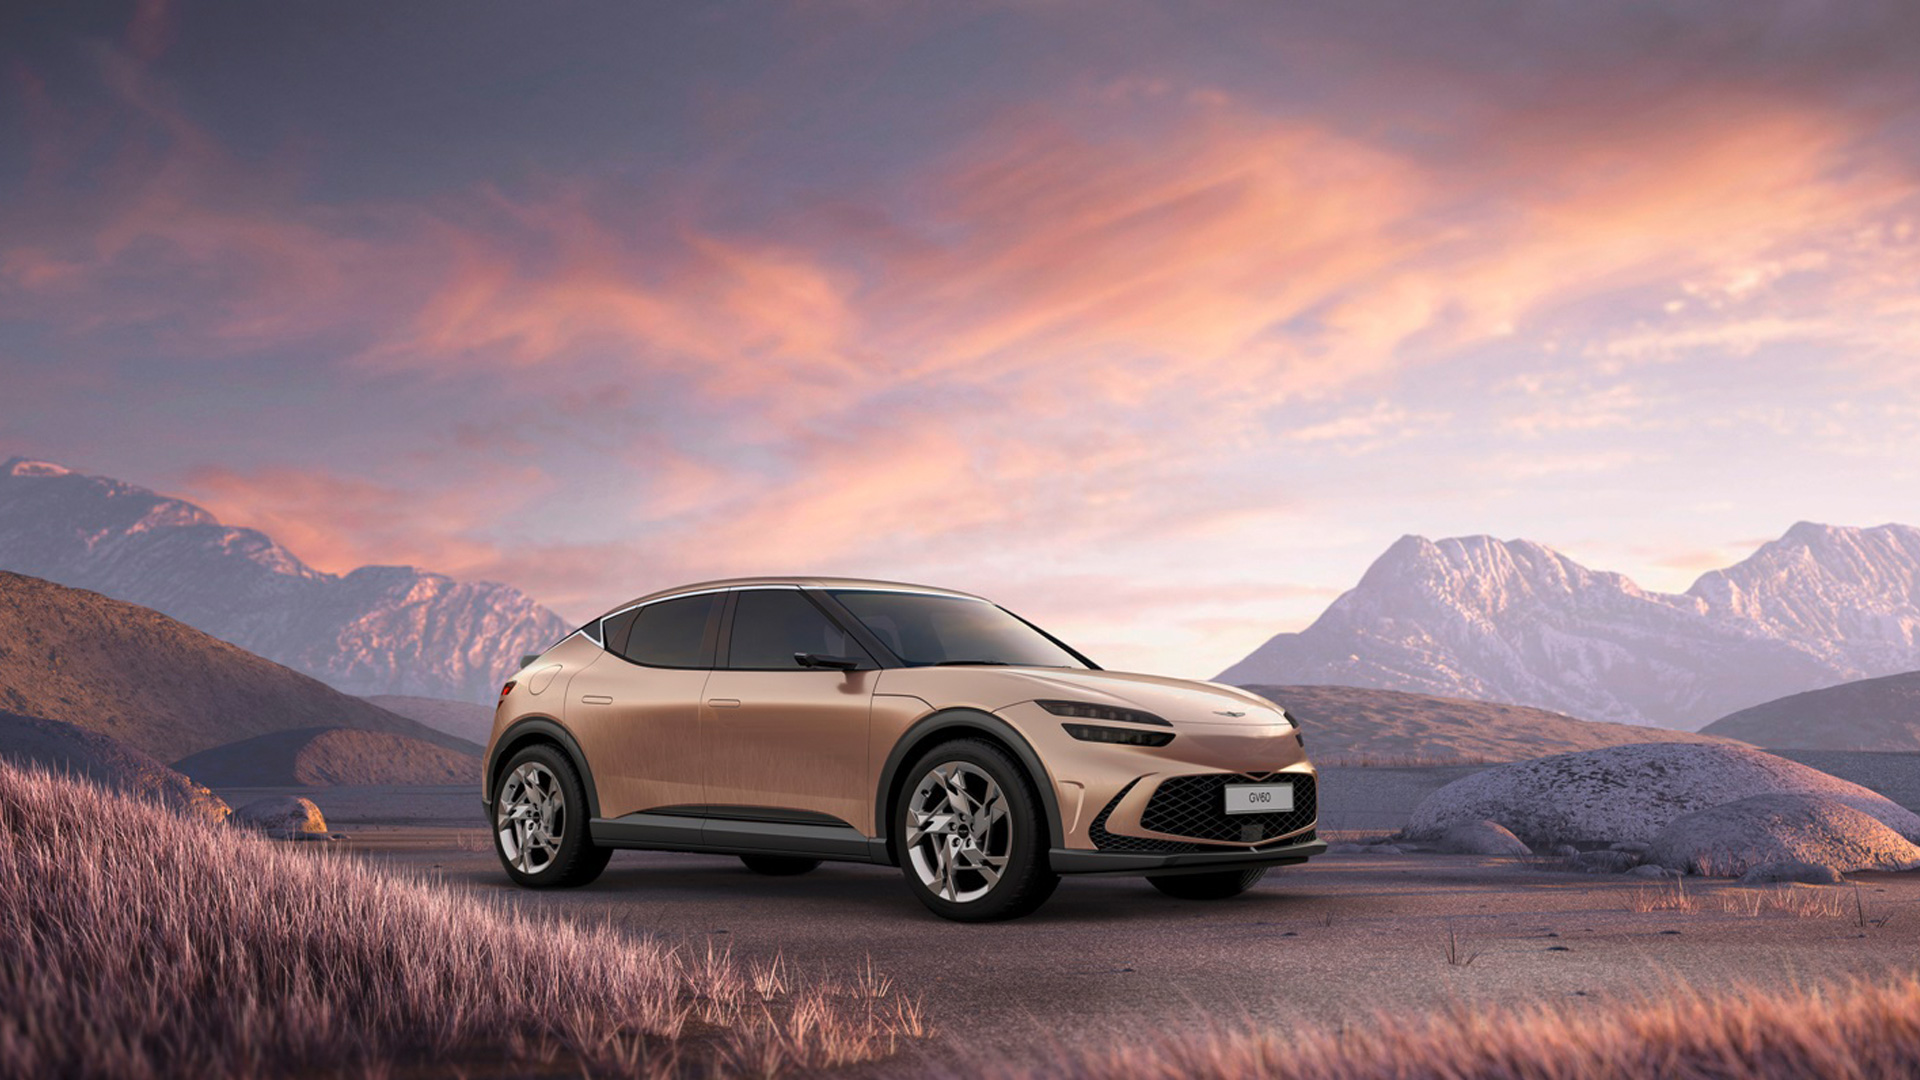 GENESIS PREMIERES THE GV60, A LUXURY EV THAT connects a vehicle to a driver